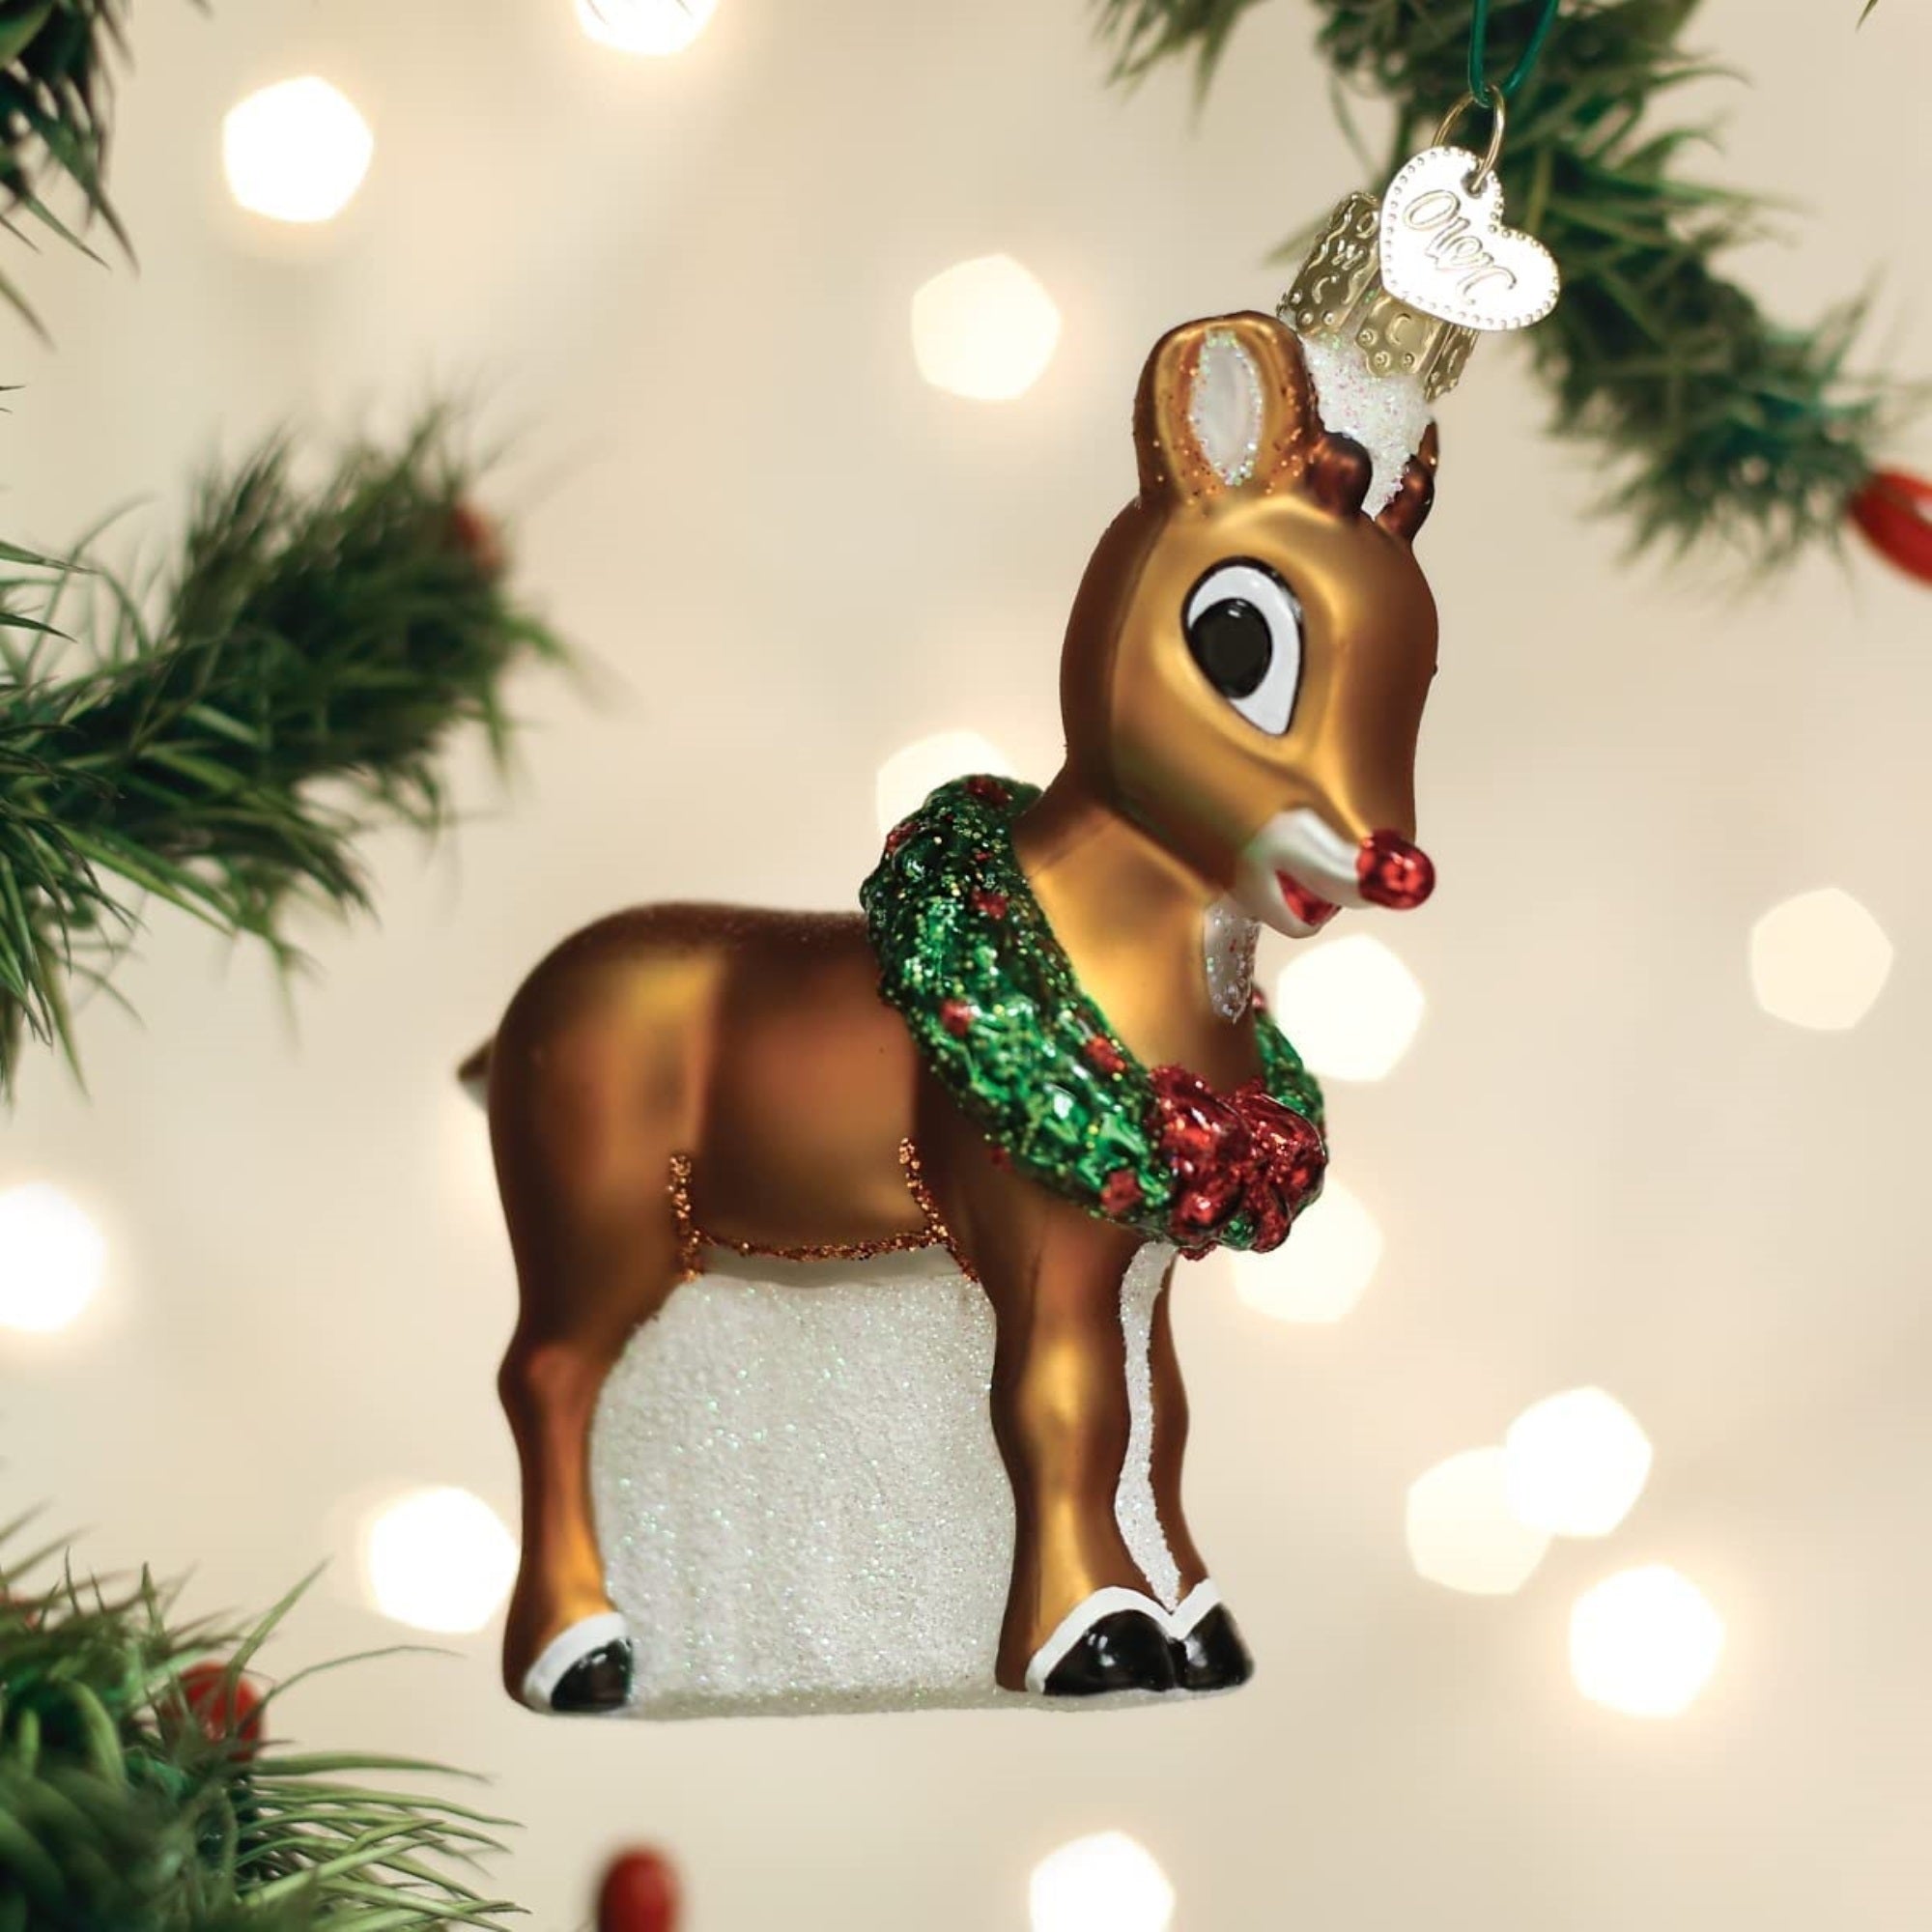 Old World Blown Glass Christmas Ornaments, Rudoph The Red-Nosed Reindeer